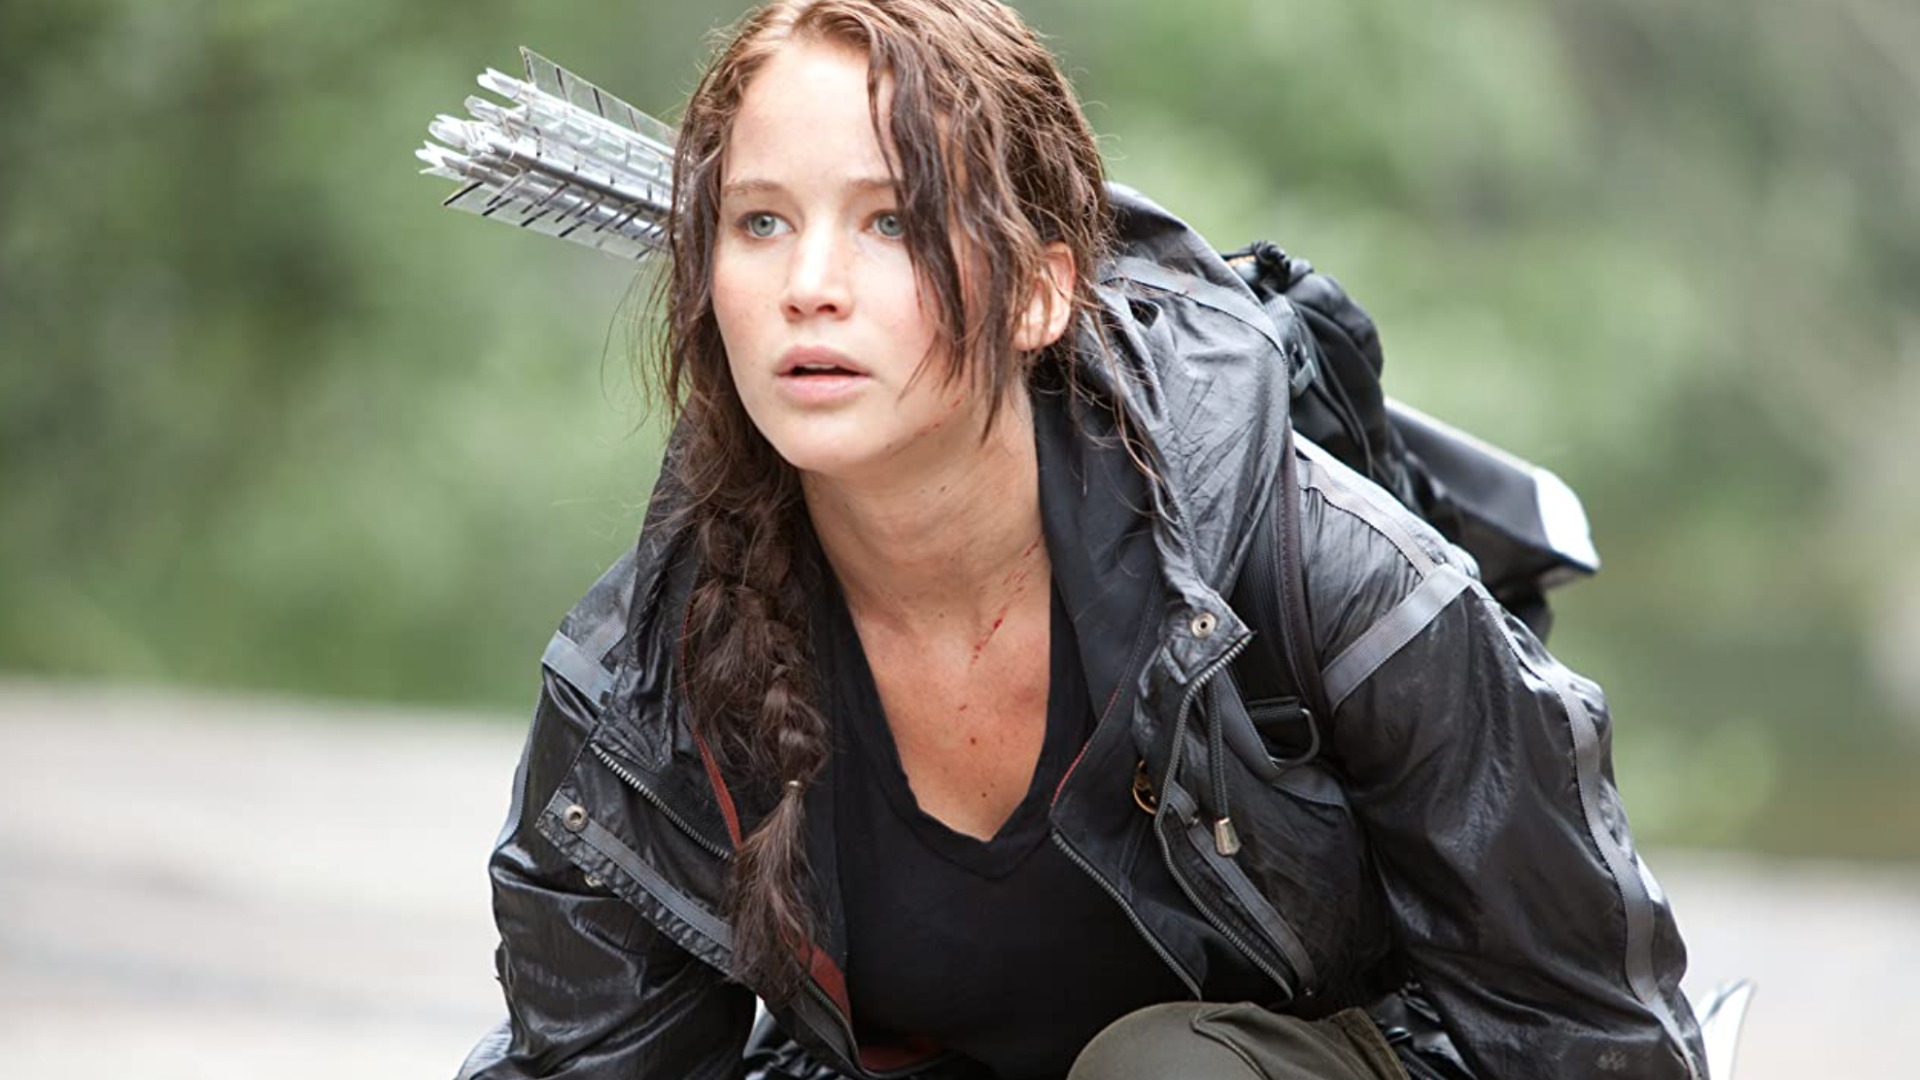 Hunger Games prequel movie gets 2023 release date